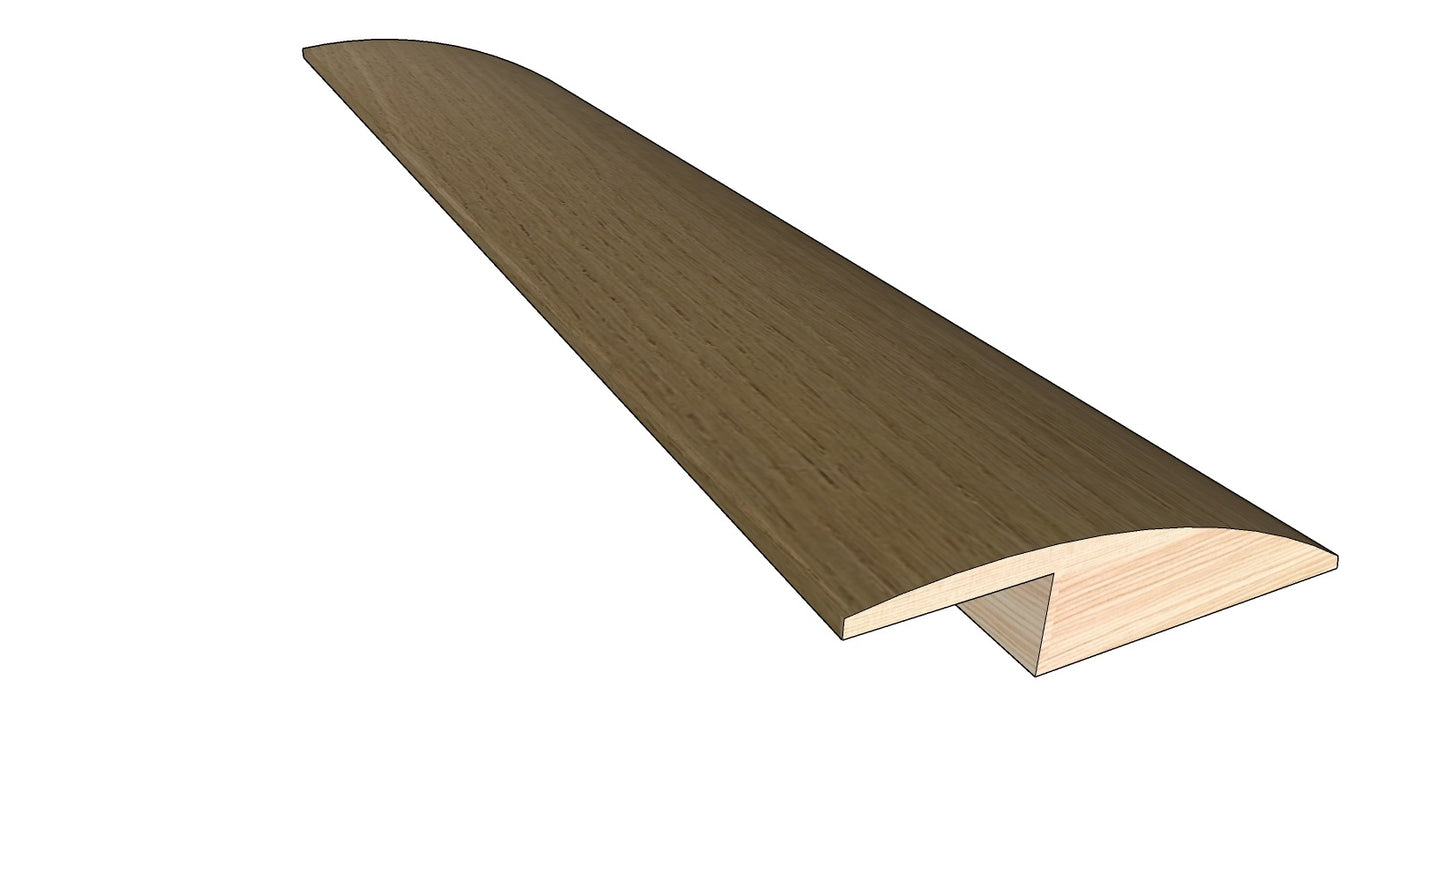 Manor 0.50 in. Thick x 1.50 in. Width x 78 in. Length Overlap Reducer Hardwood Molding